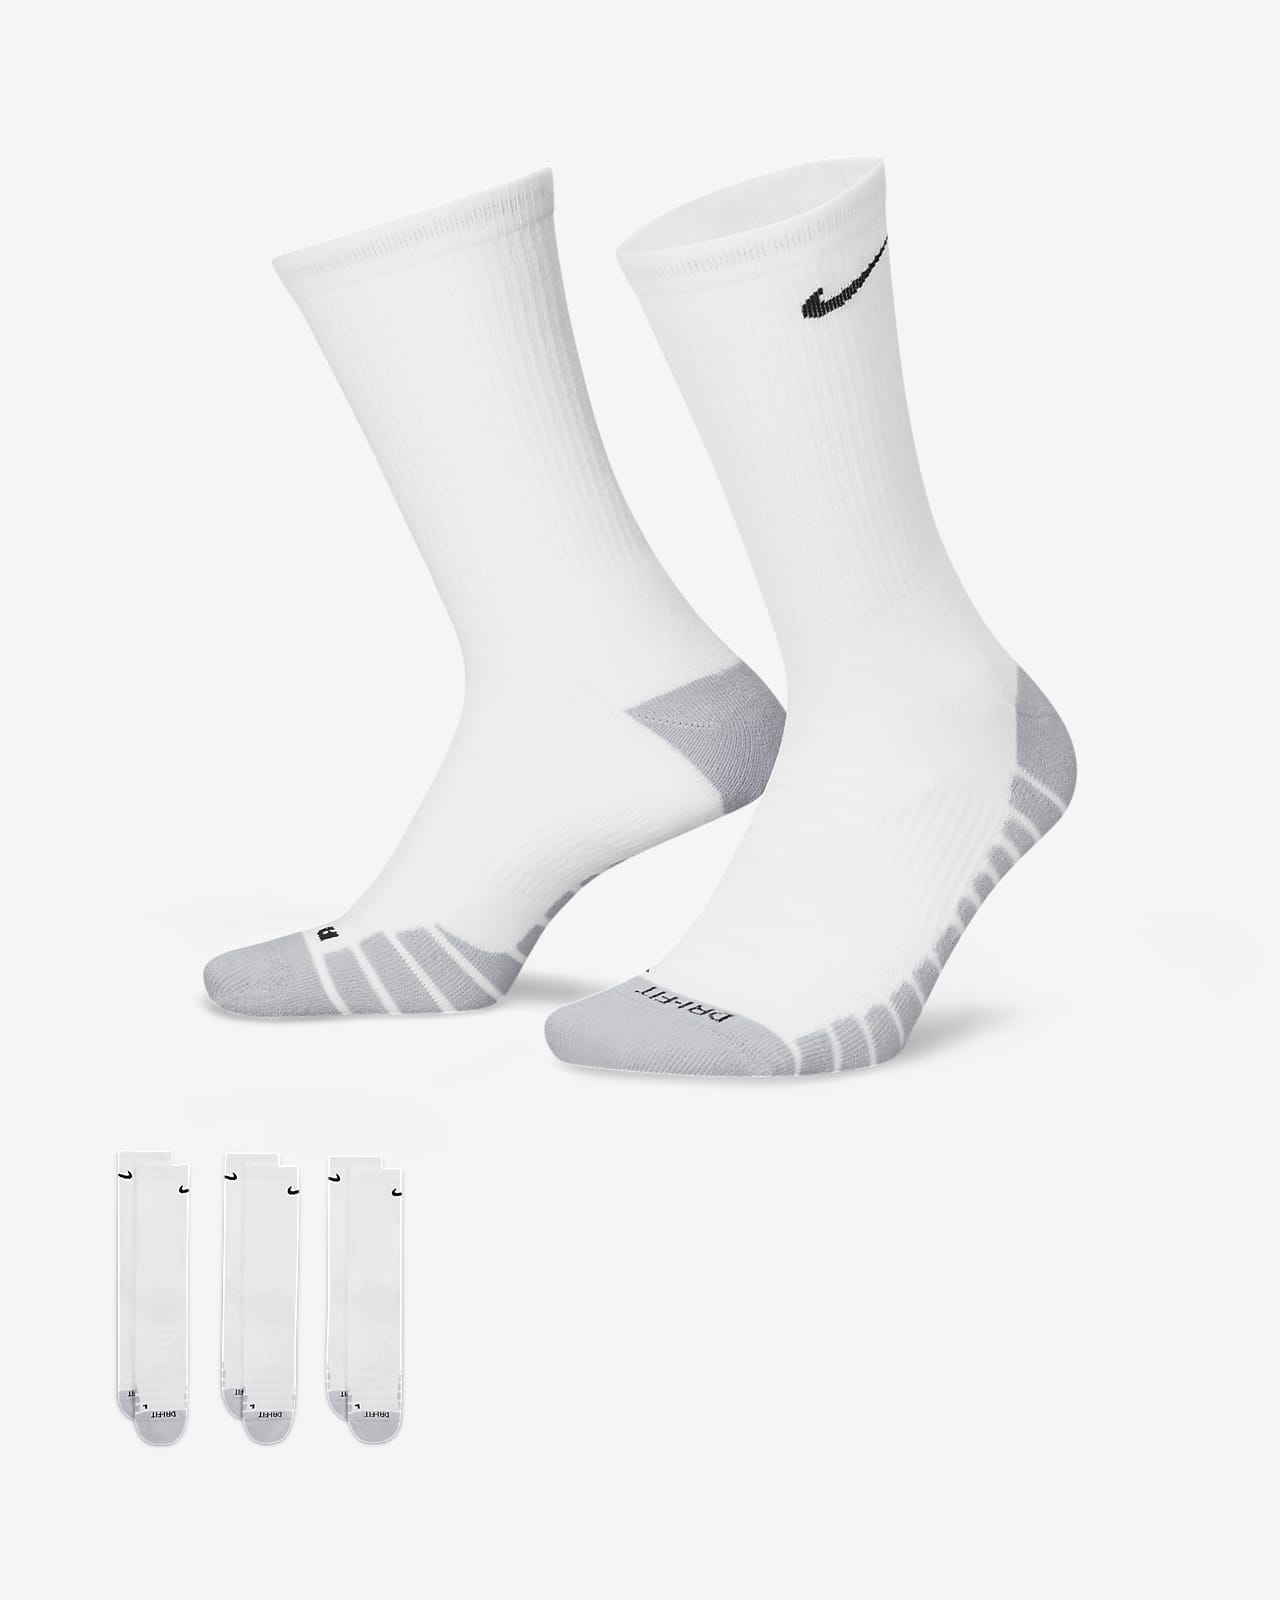 Chaussettes de training mi-mollet Nike Everyday Max Cushioned (3 paires)